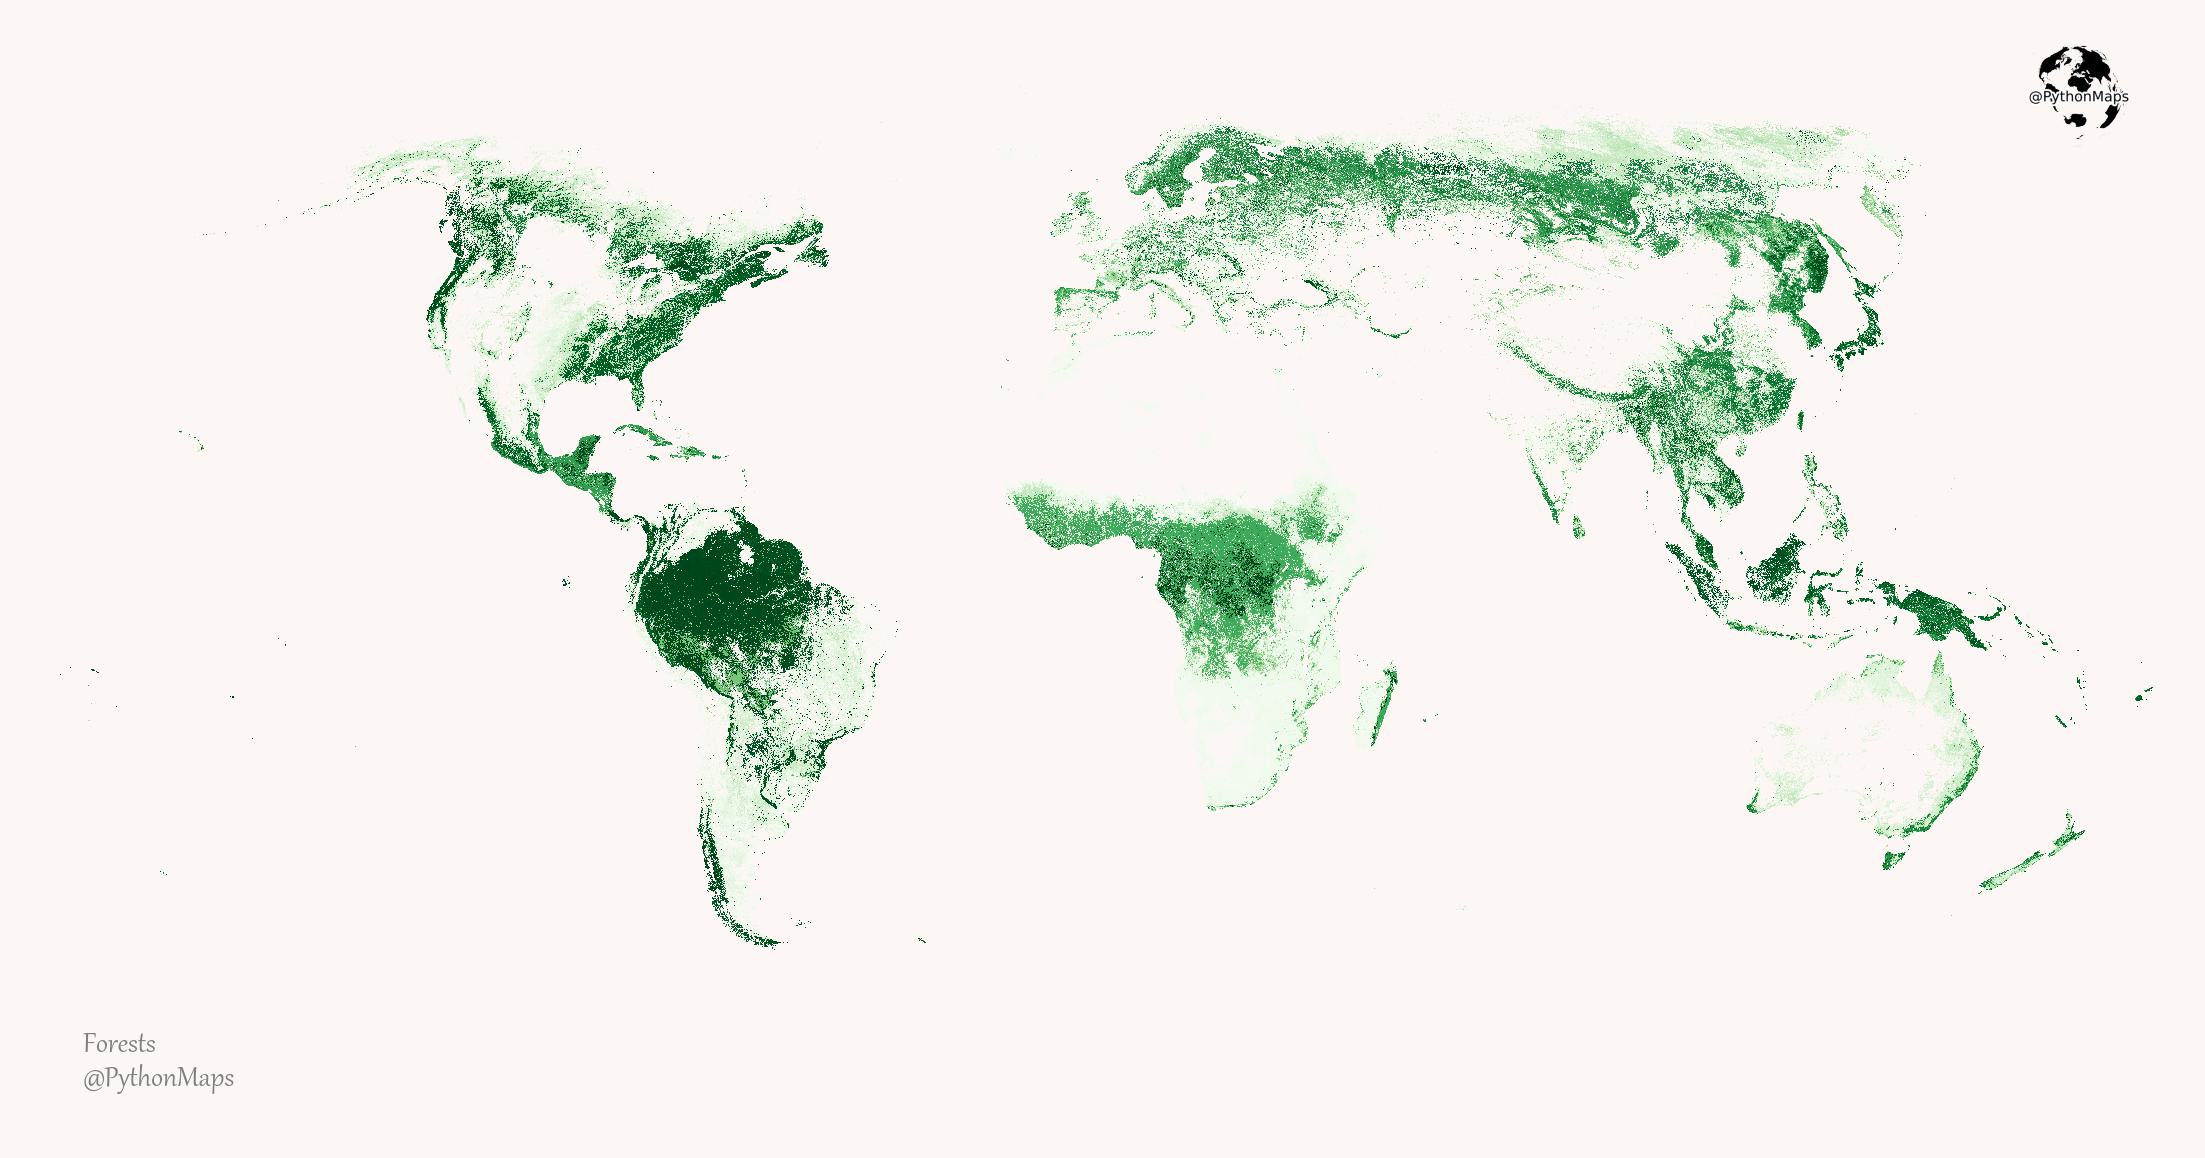 The World's Forests